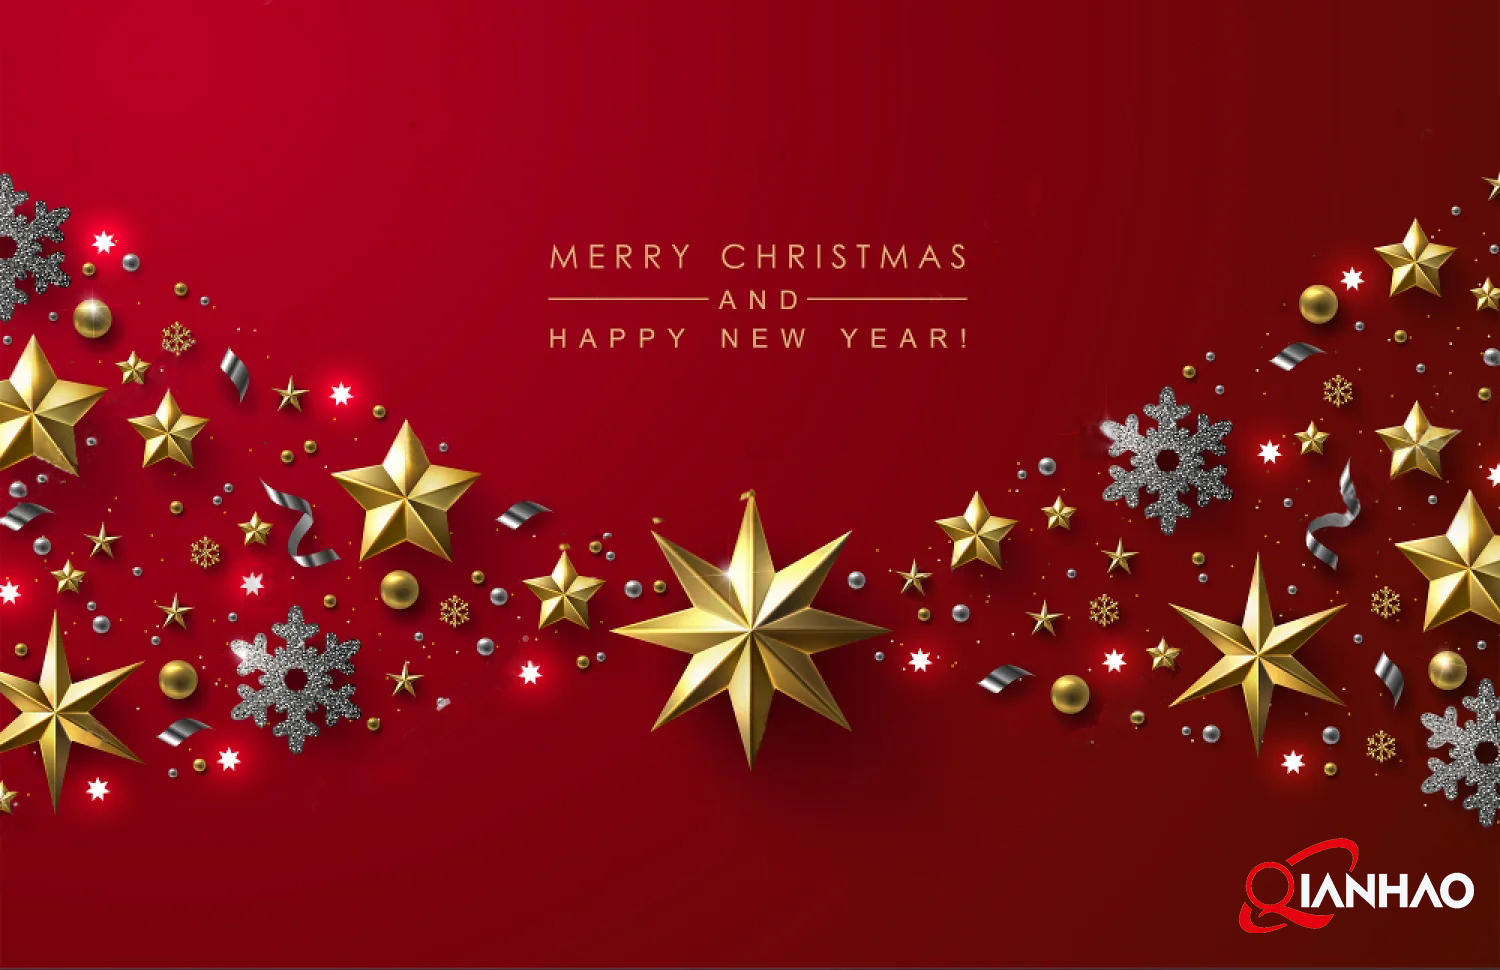 Merry Christmas from Qianhao Group